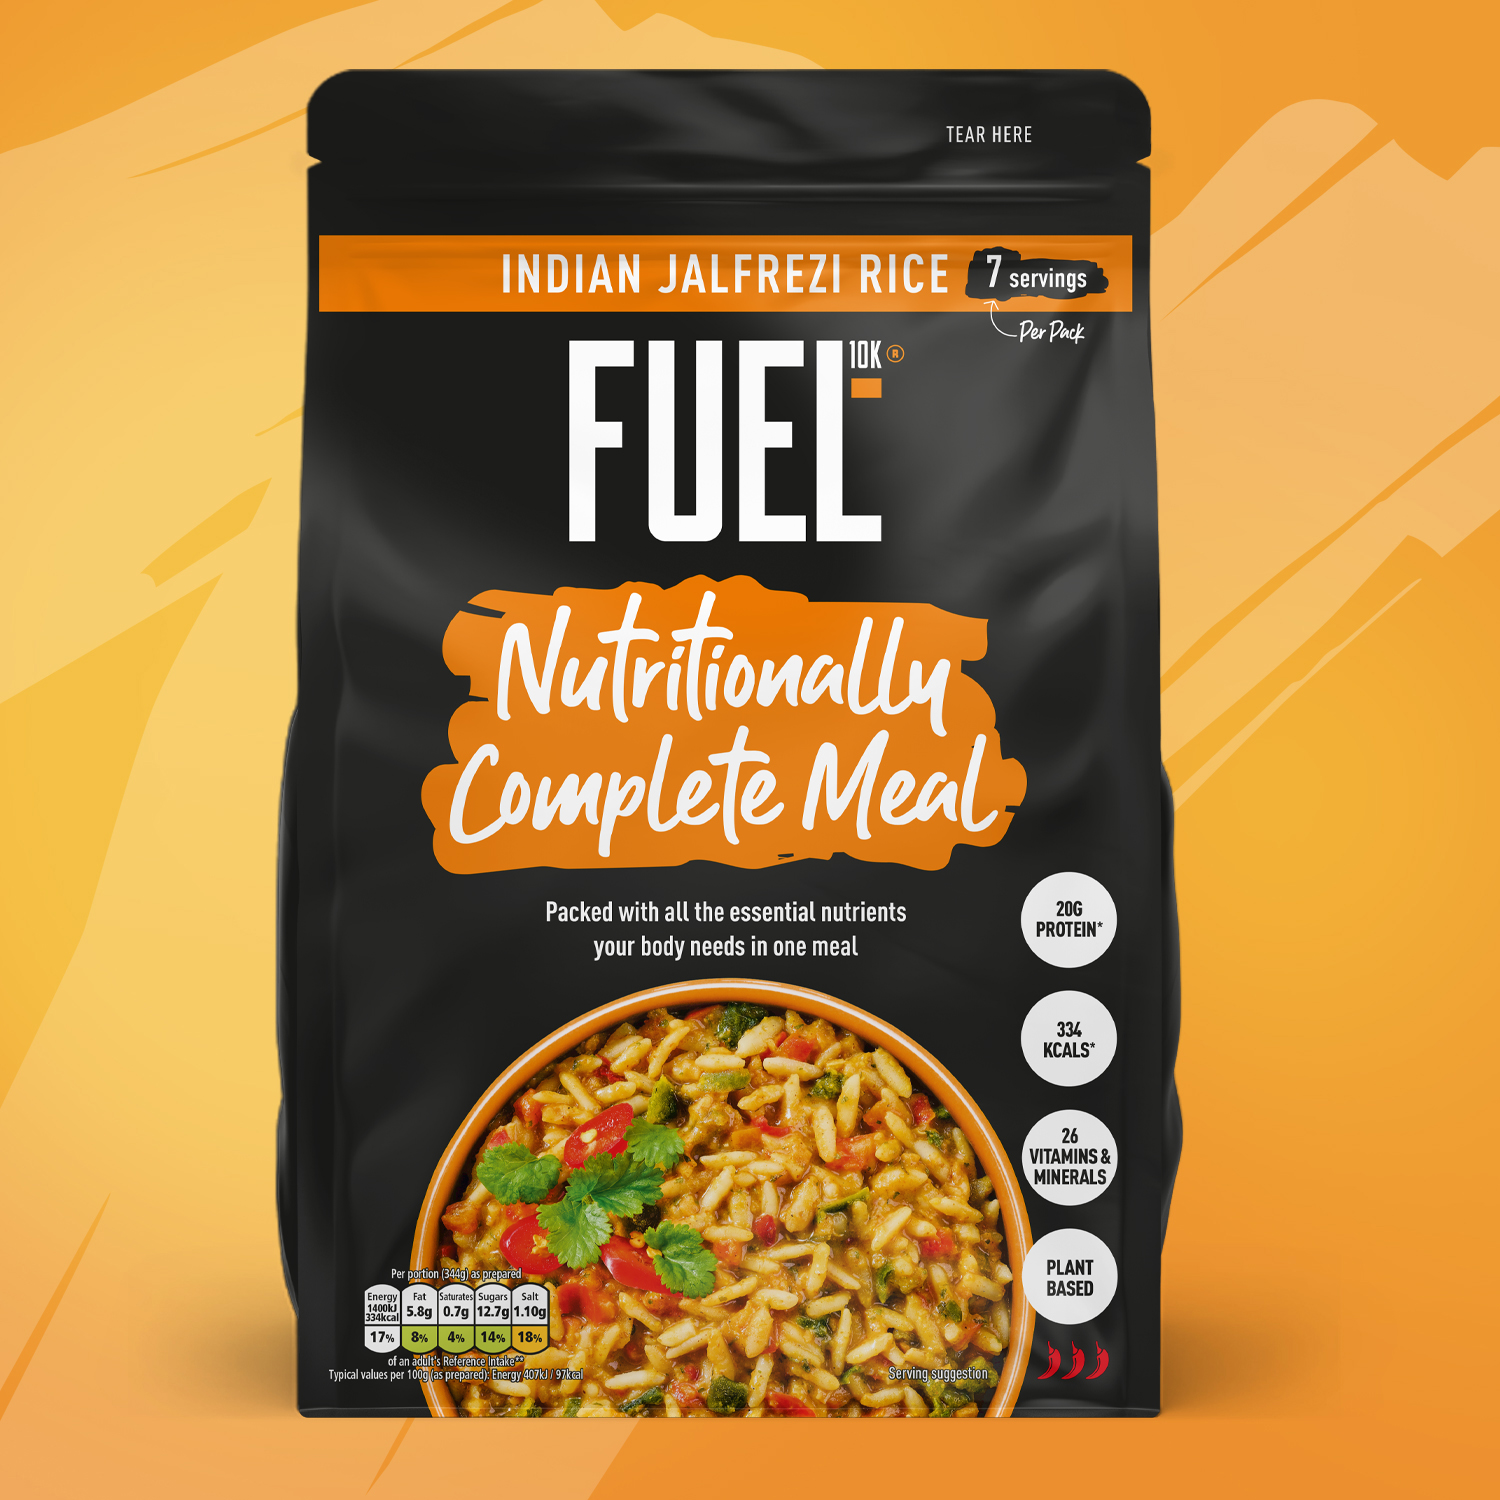 FUEL10K. Shop Nutritionally Complete Meal Rice - Indian Jalfrezi flavour